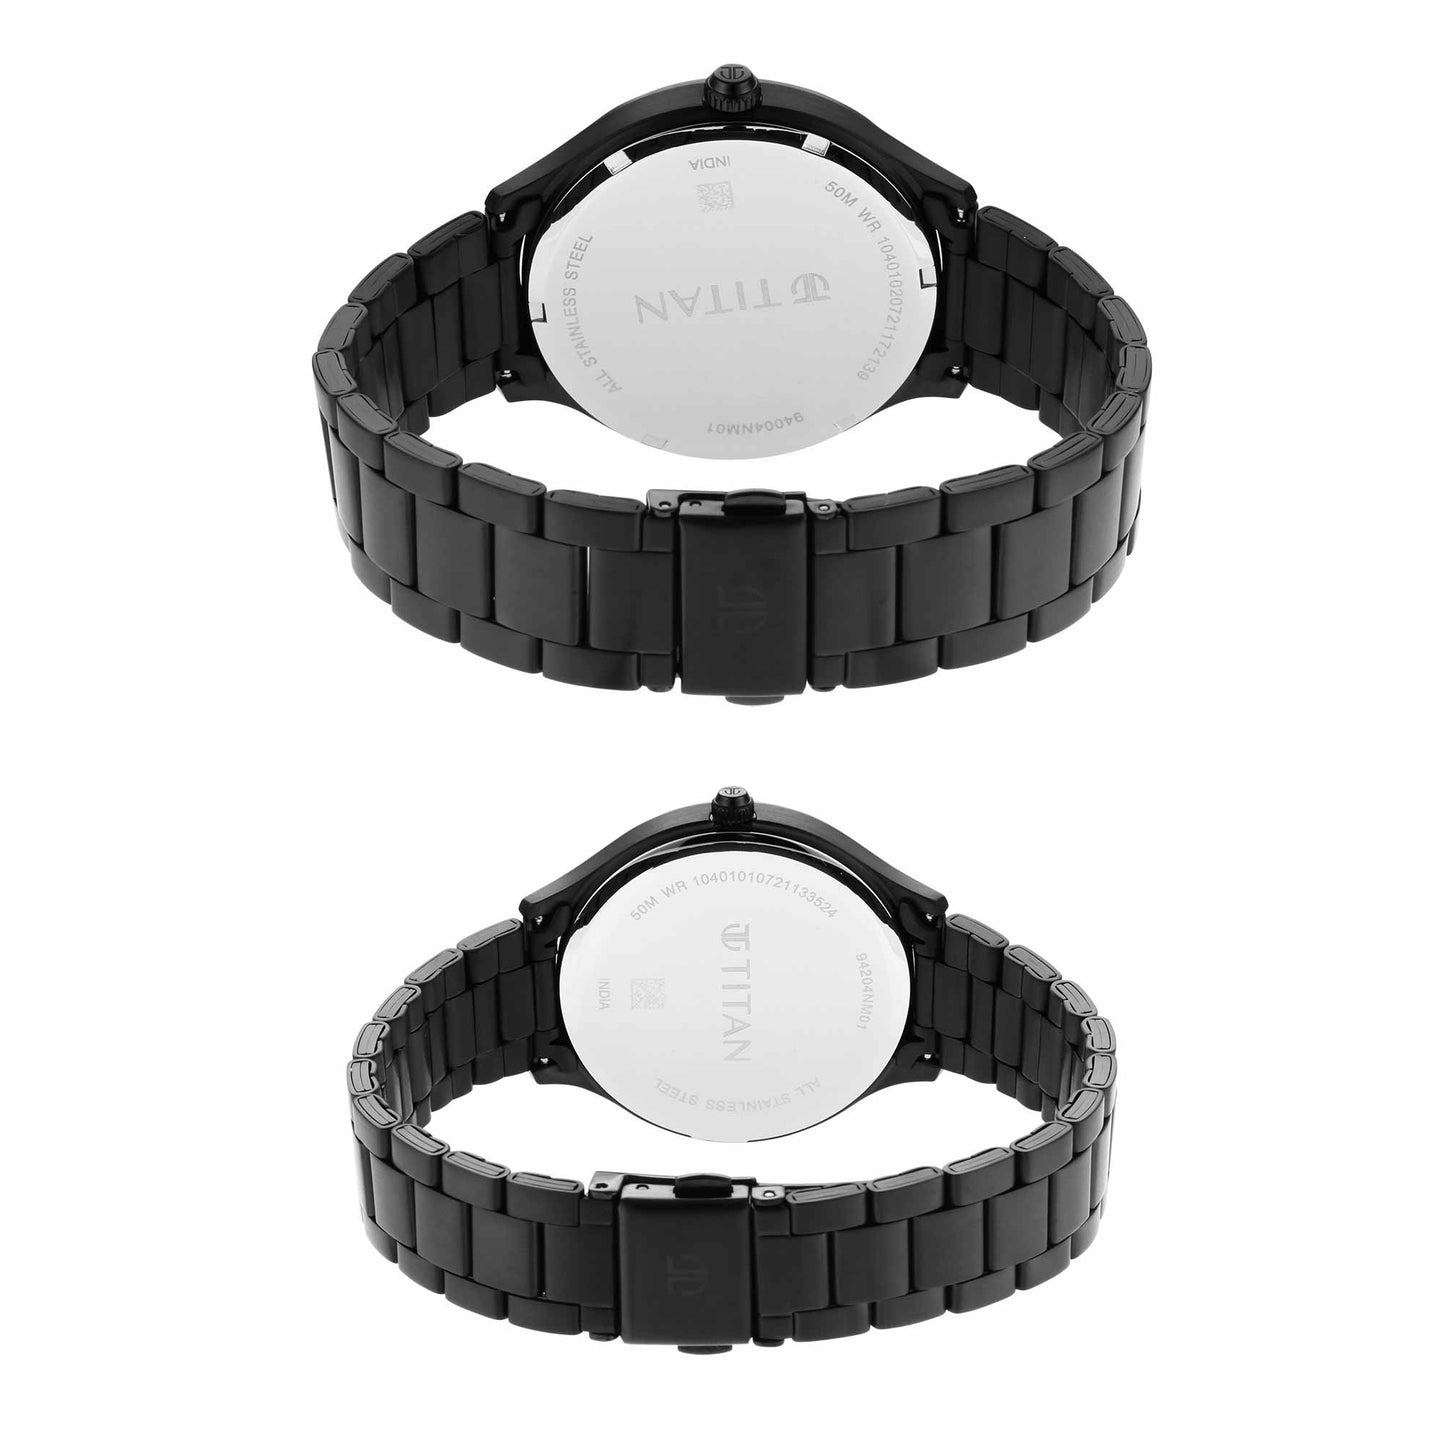 Titan Bandhan Black Dial Multi Stainless Steel Strap watch for Couple.